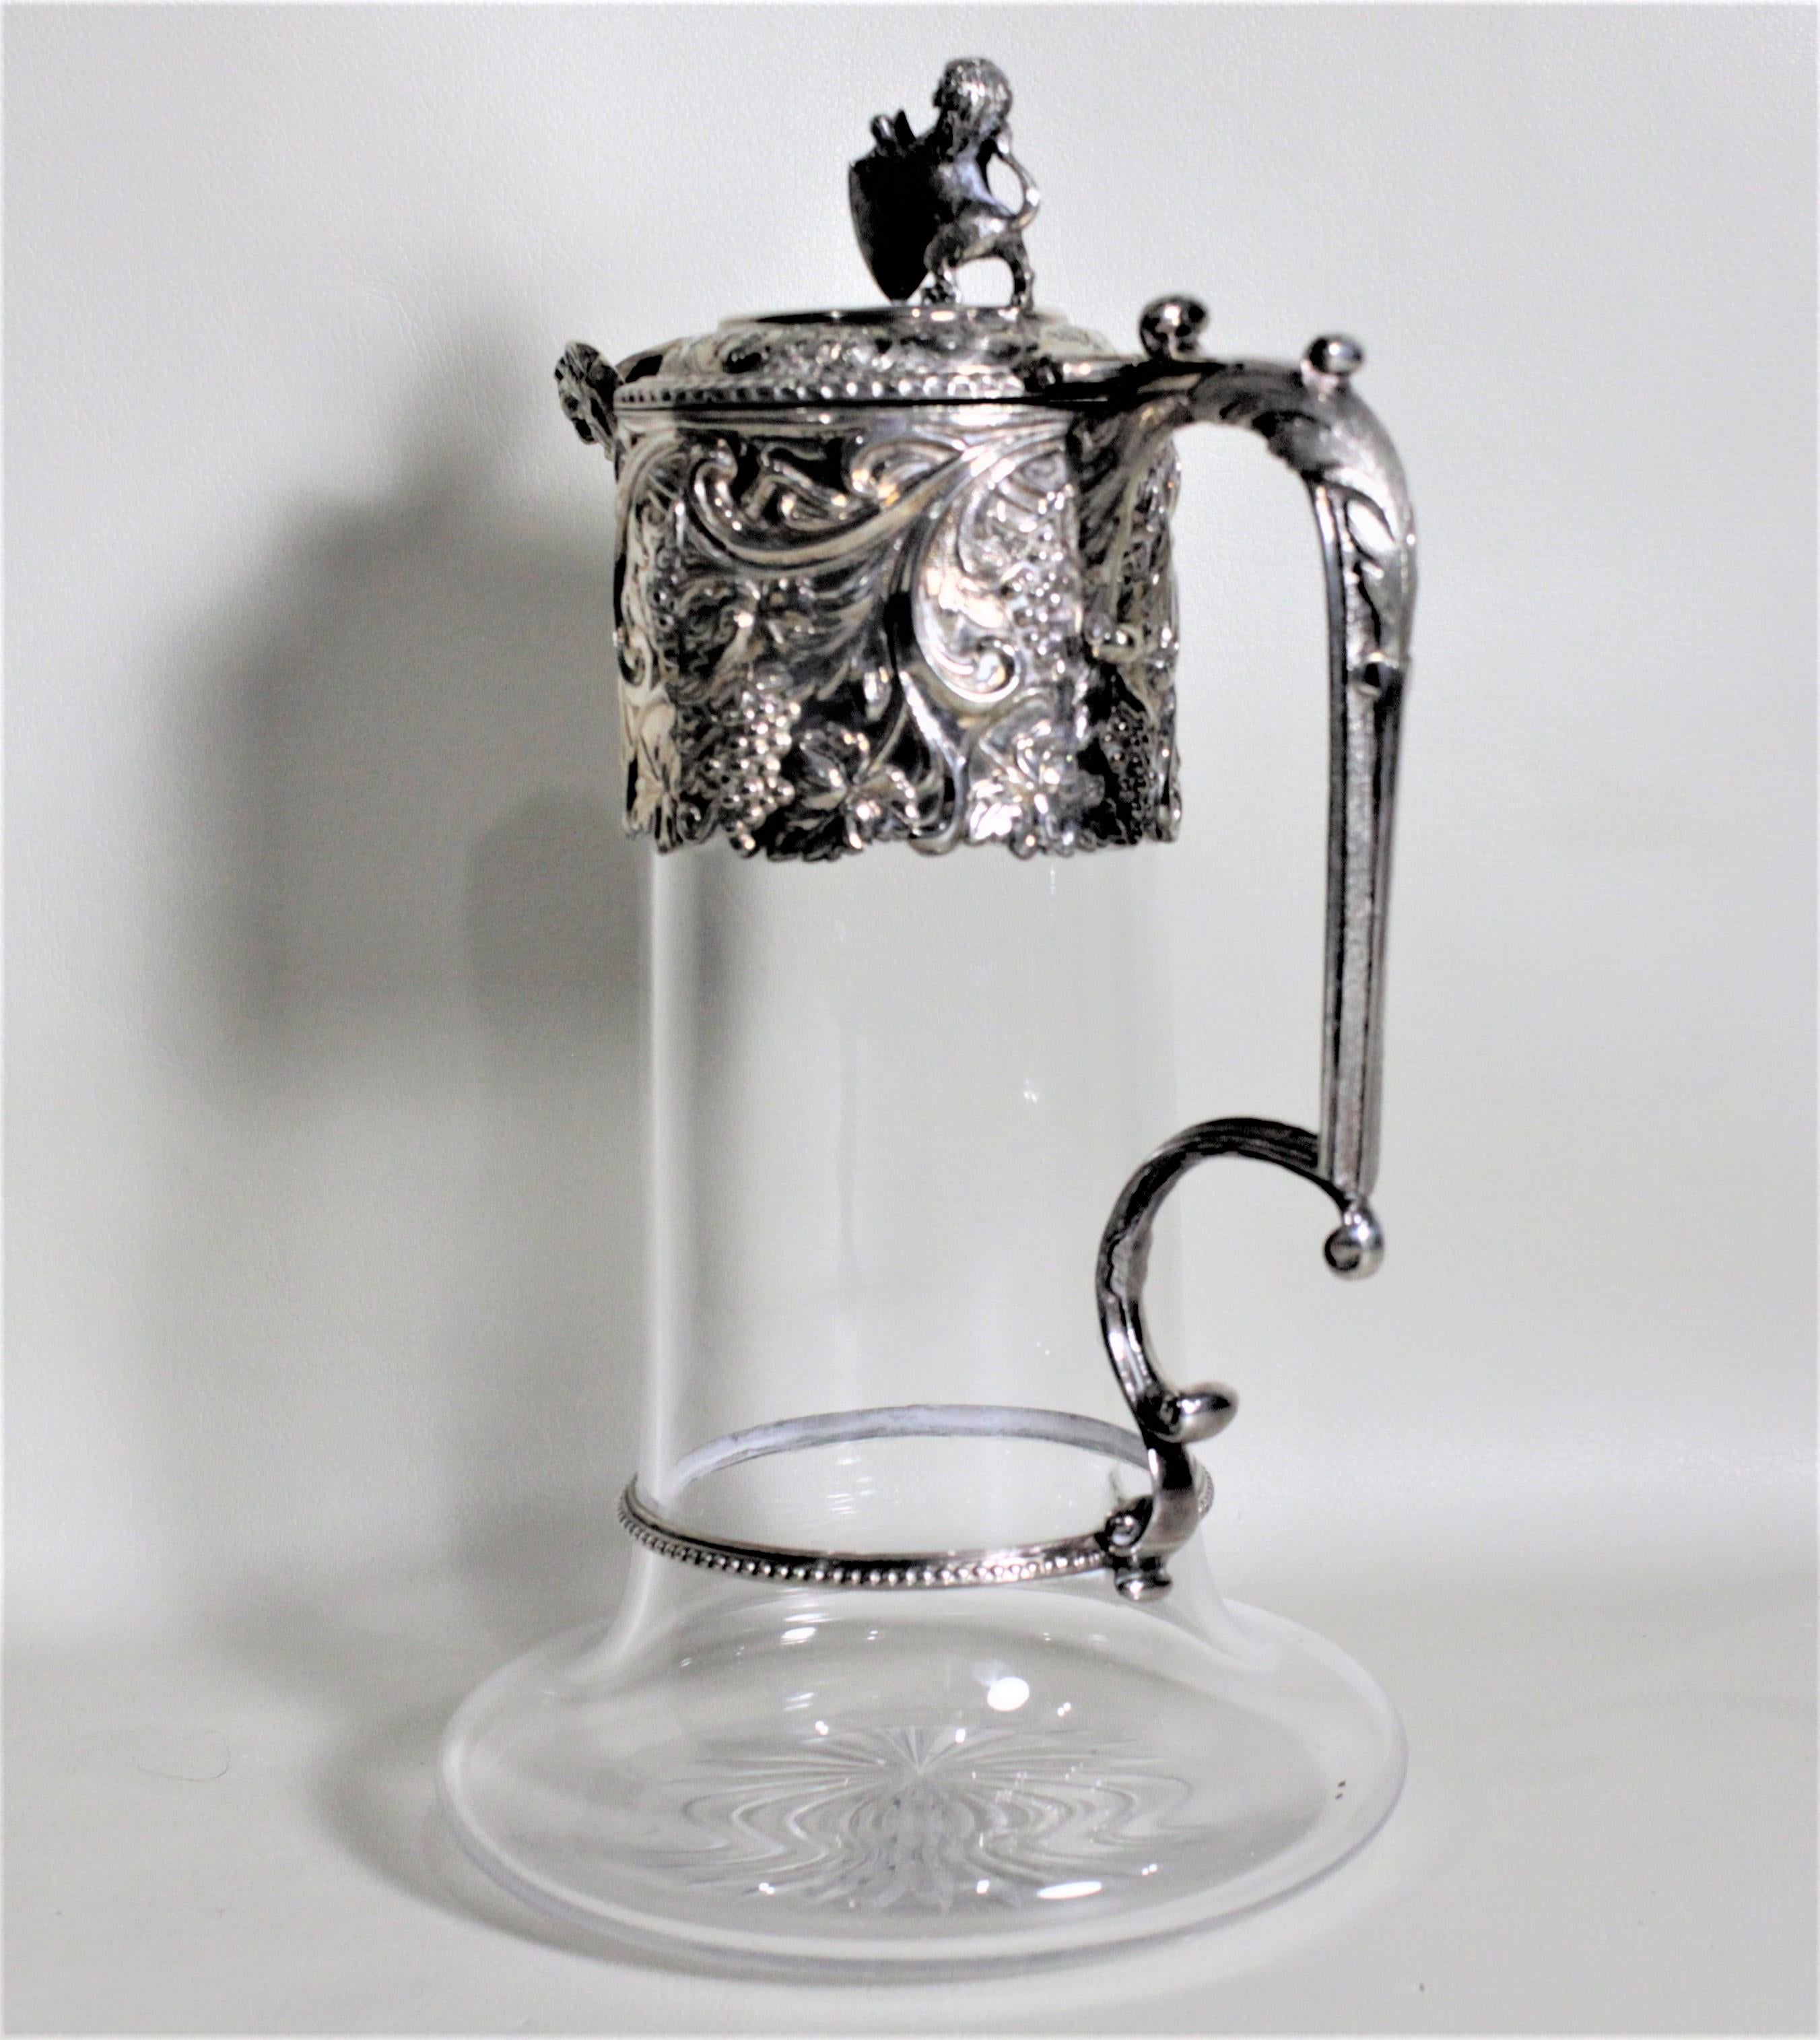 20th Century Antique English Silver Plated and Cut Glass Claret Jug or Decanter For Sale